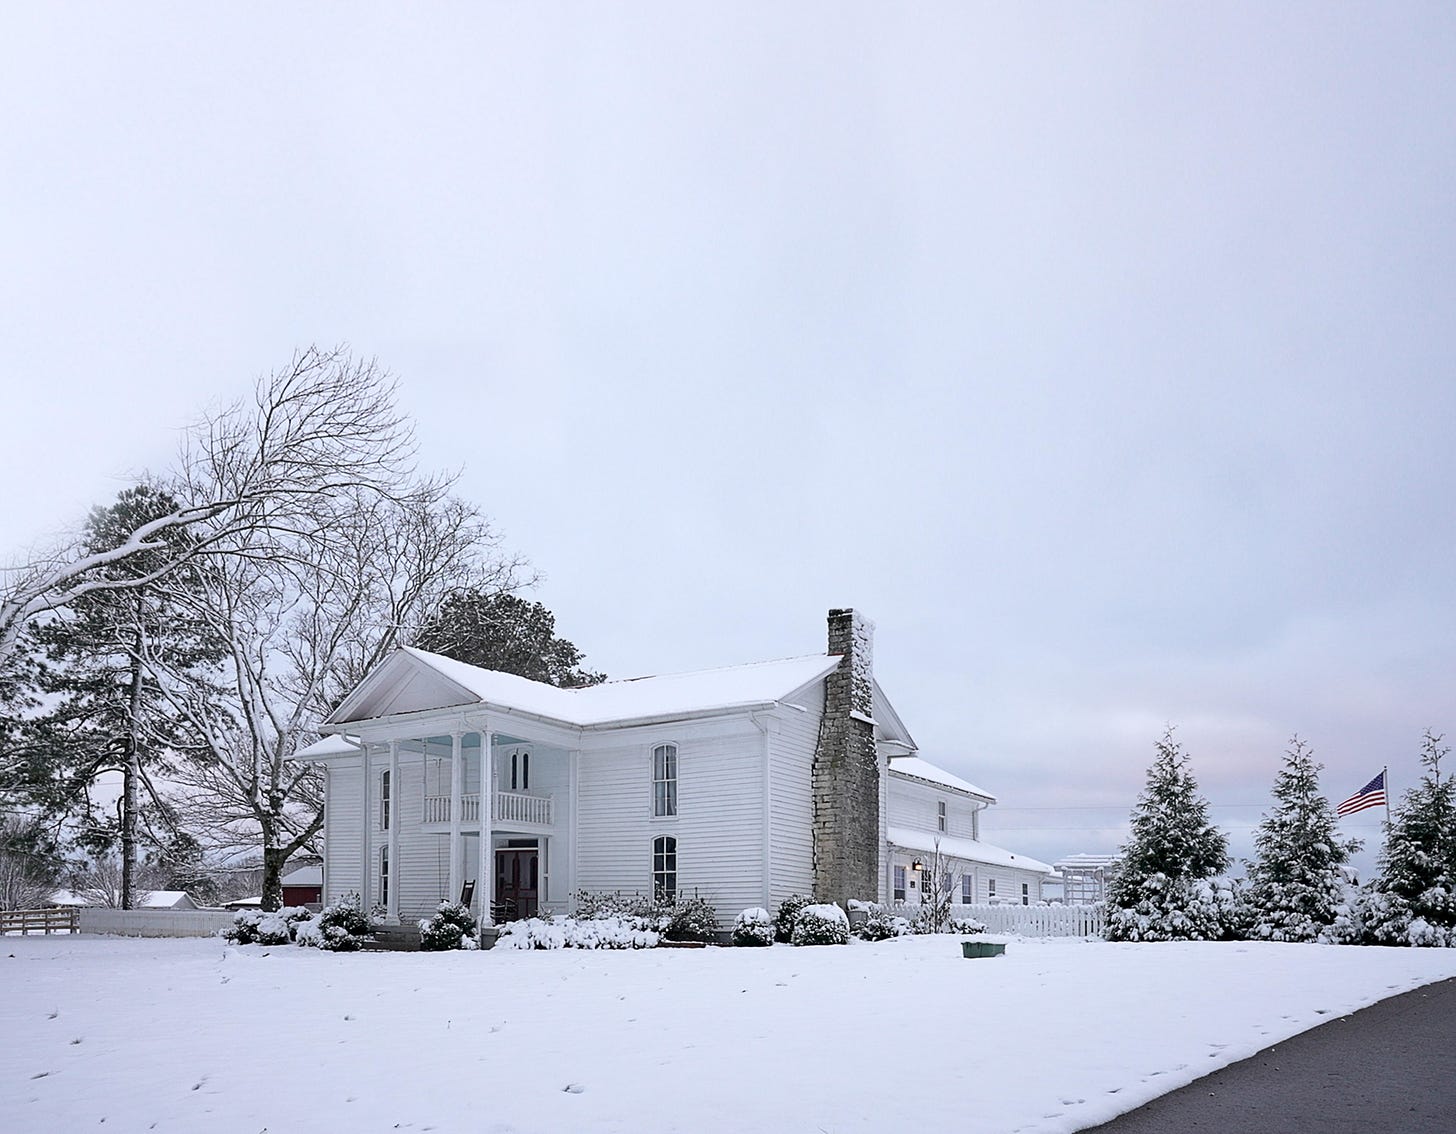 Rory Feek's homestead in the snow